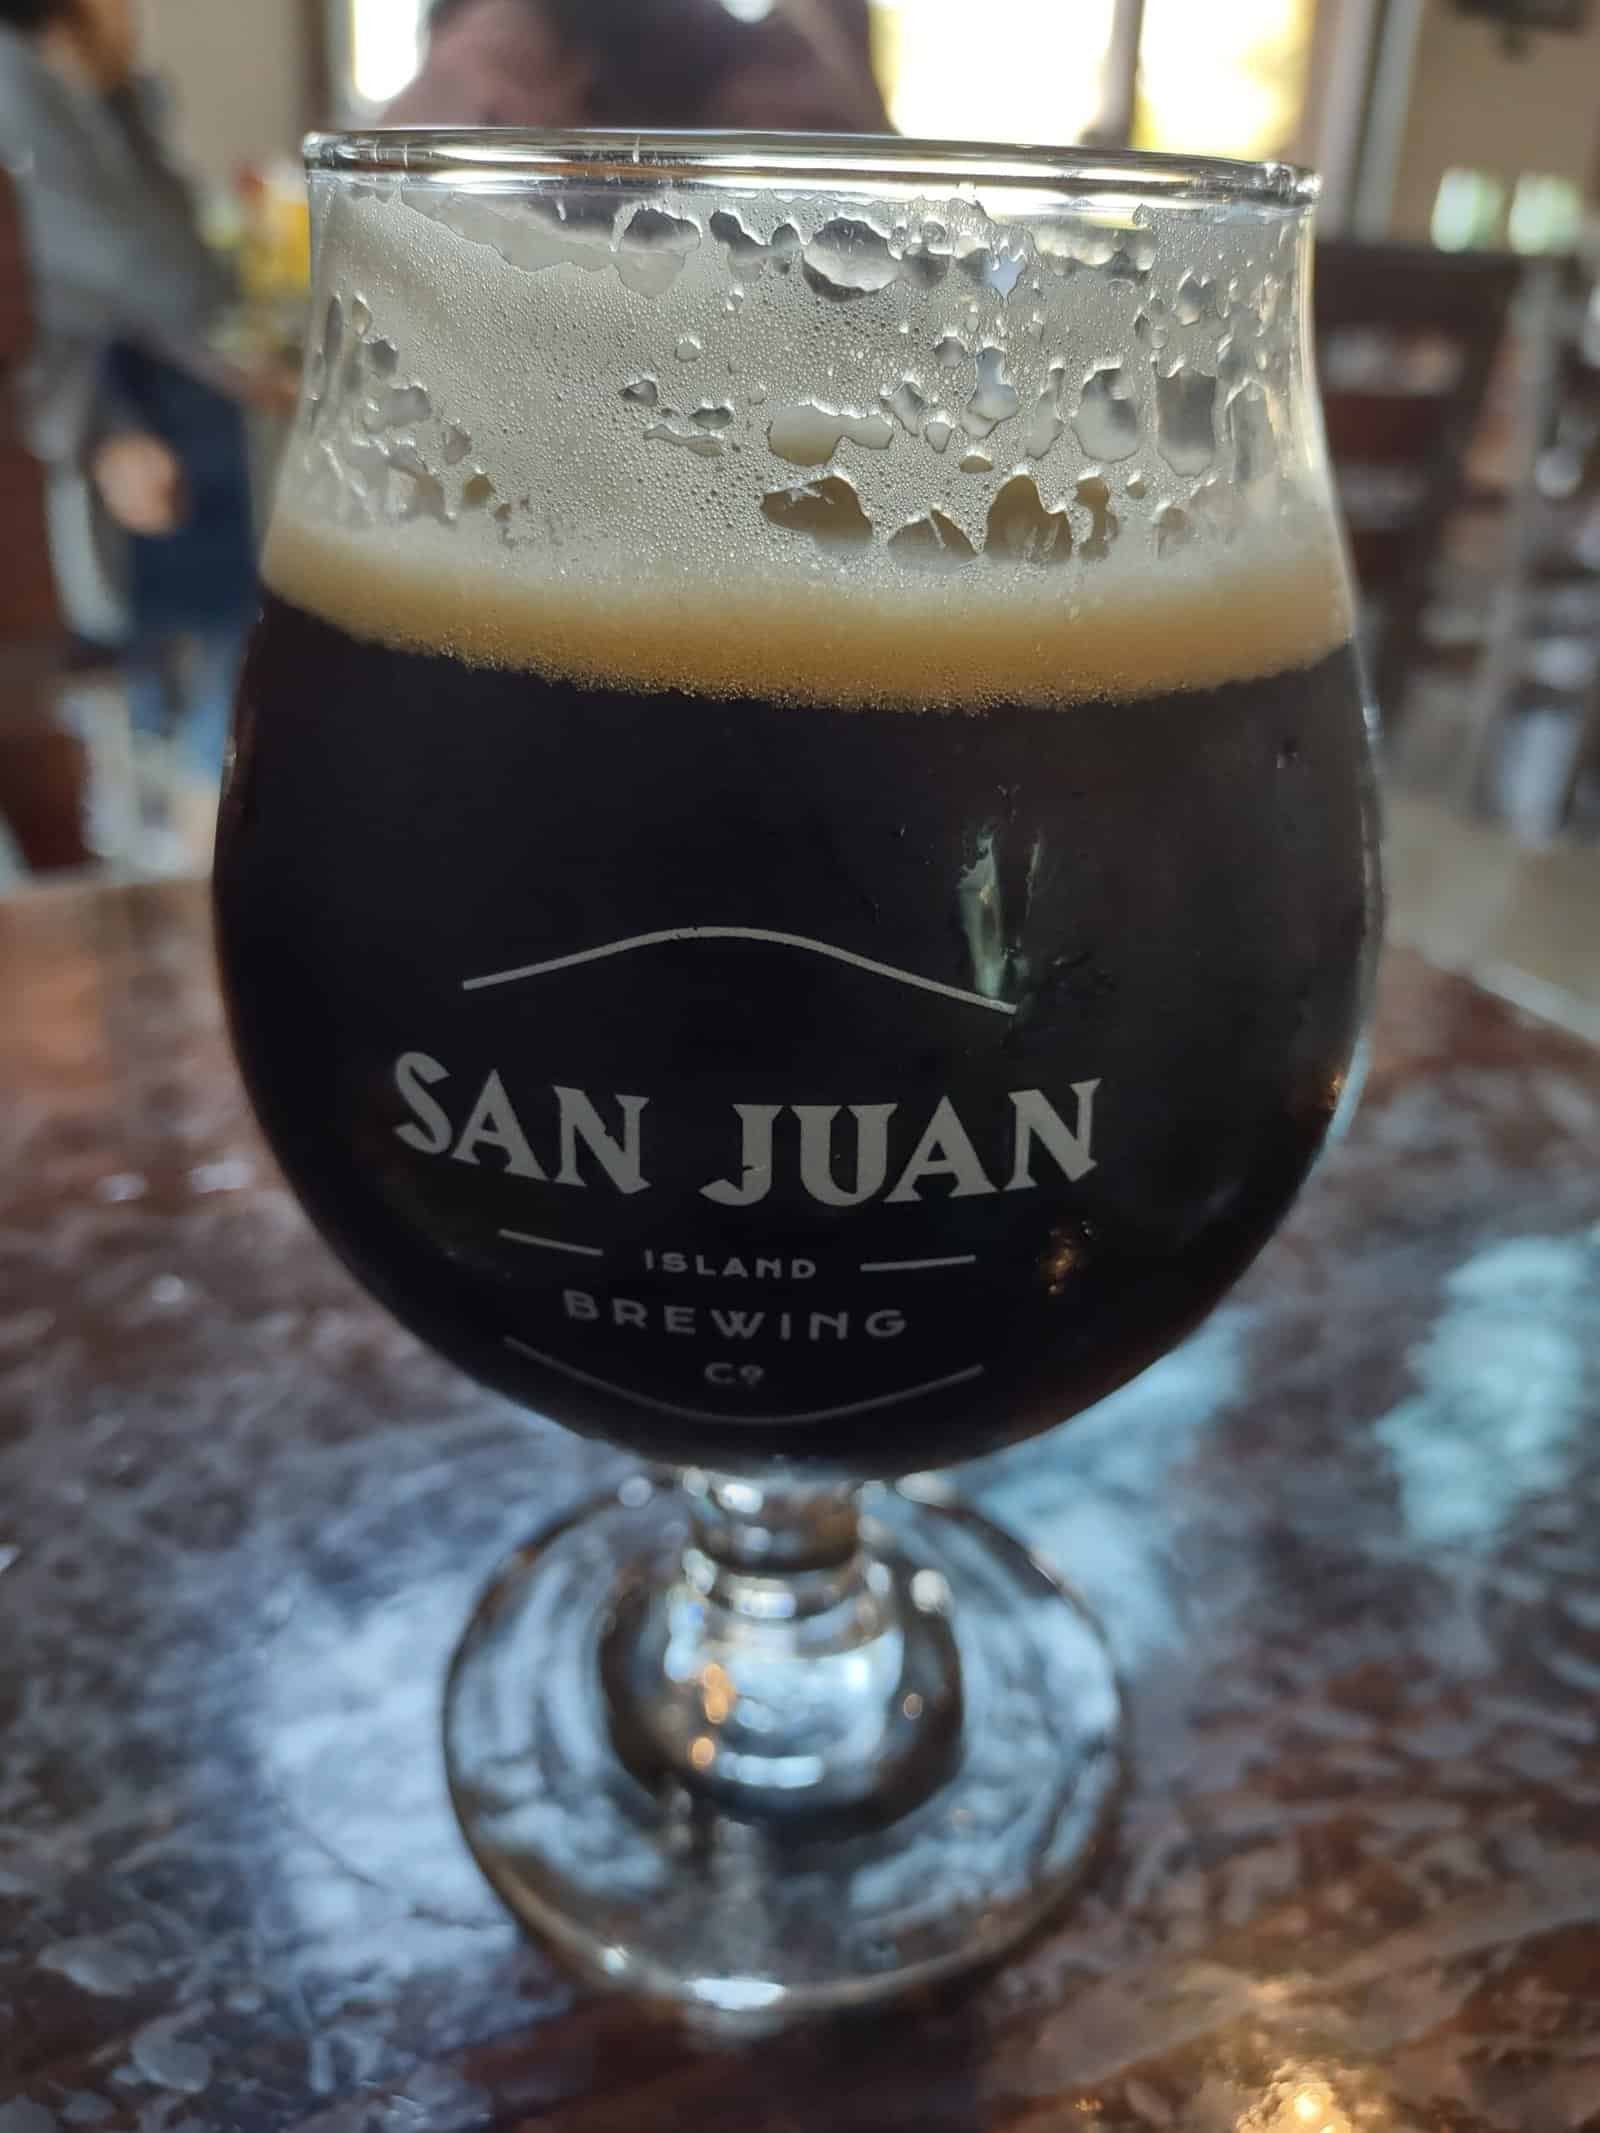 A dark beer in a glass from San Juan Island Brewing Company